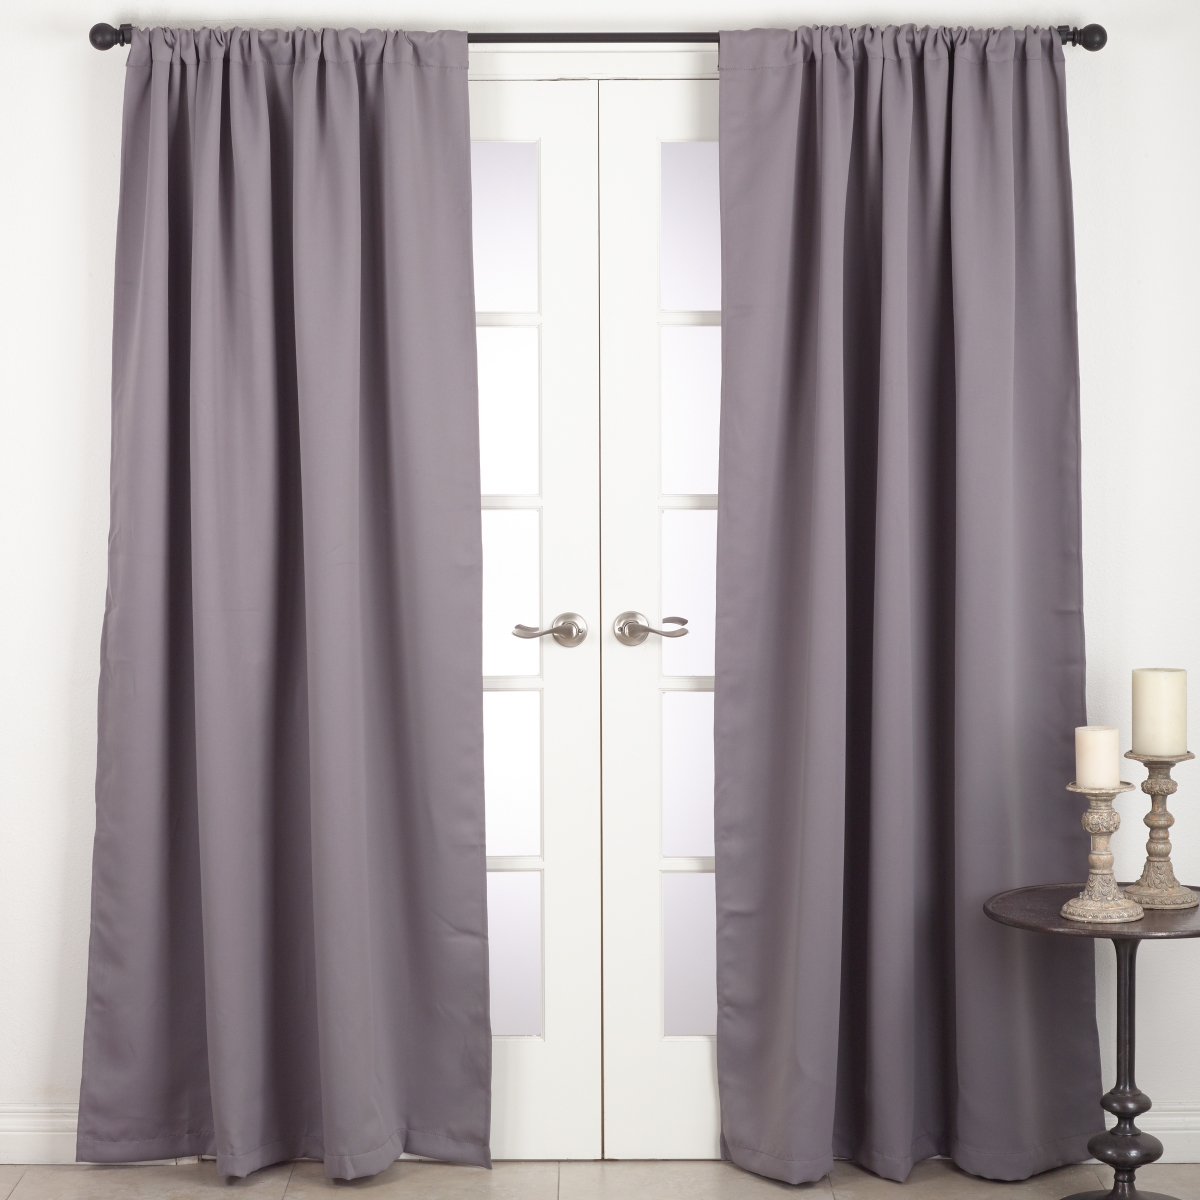 C115.gy5484 54 X 84 In. Solid Rod Pocket Blackout Window Curtain Panel, Grey